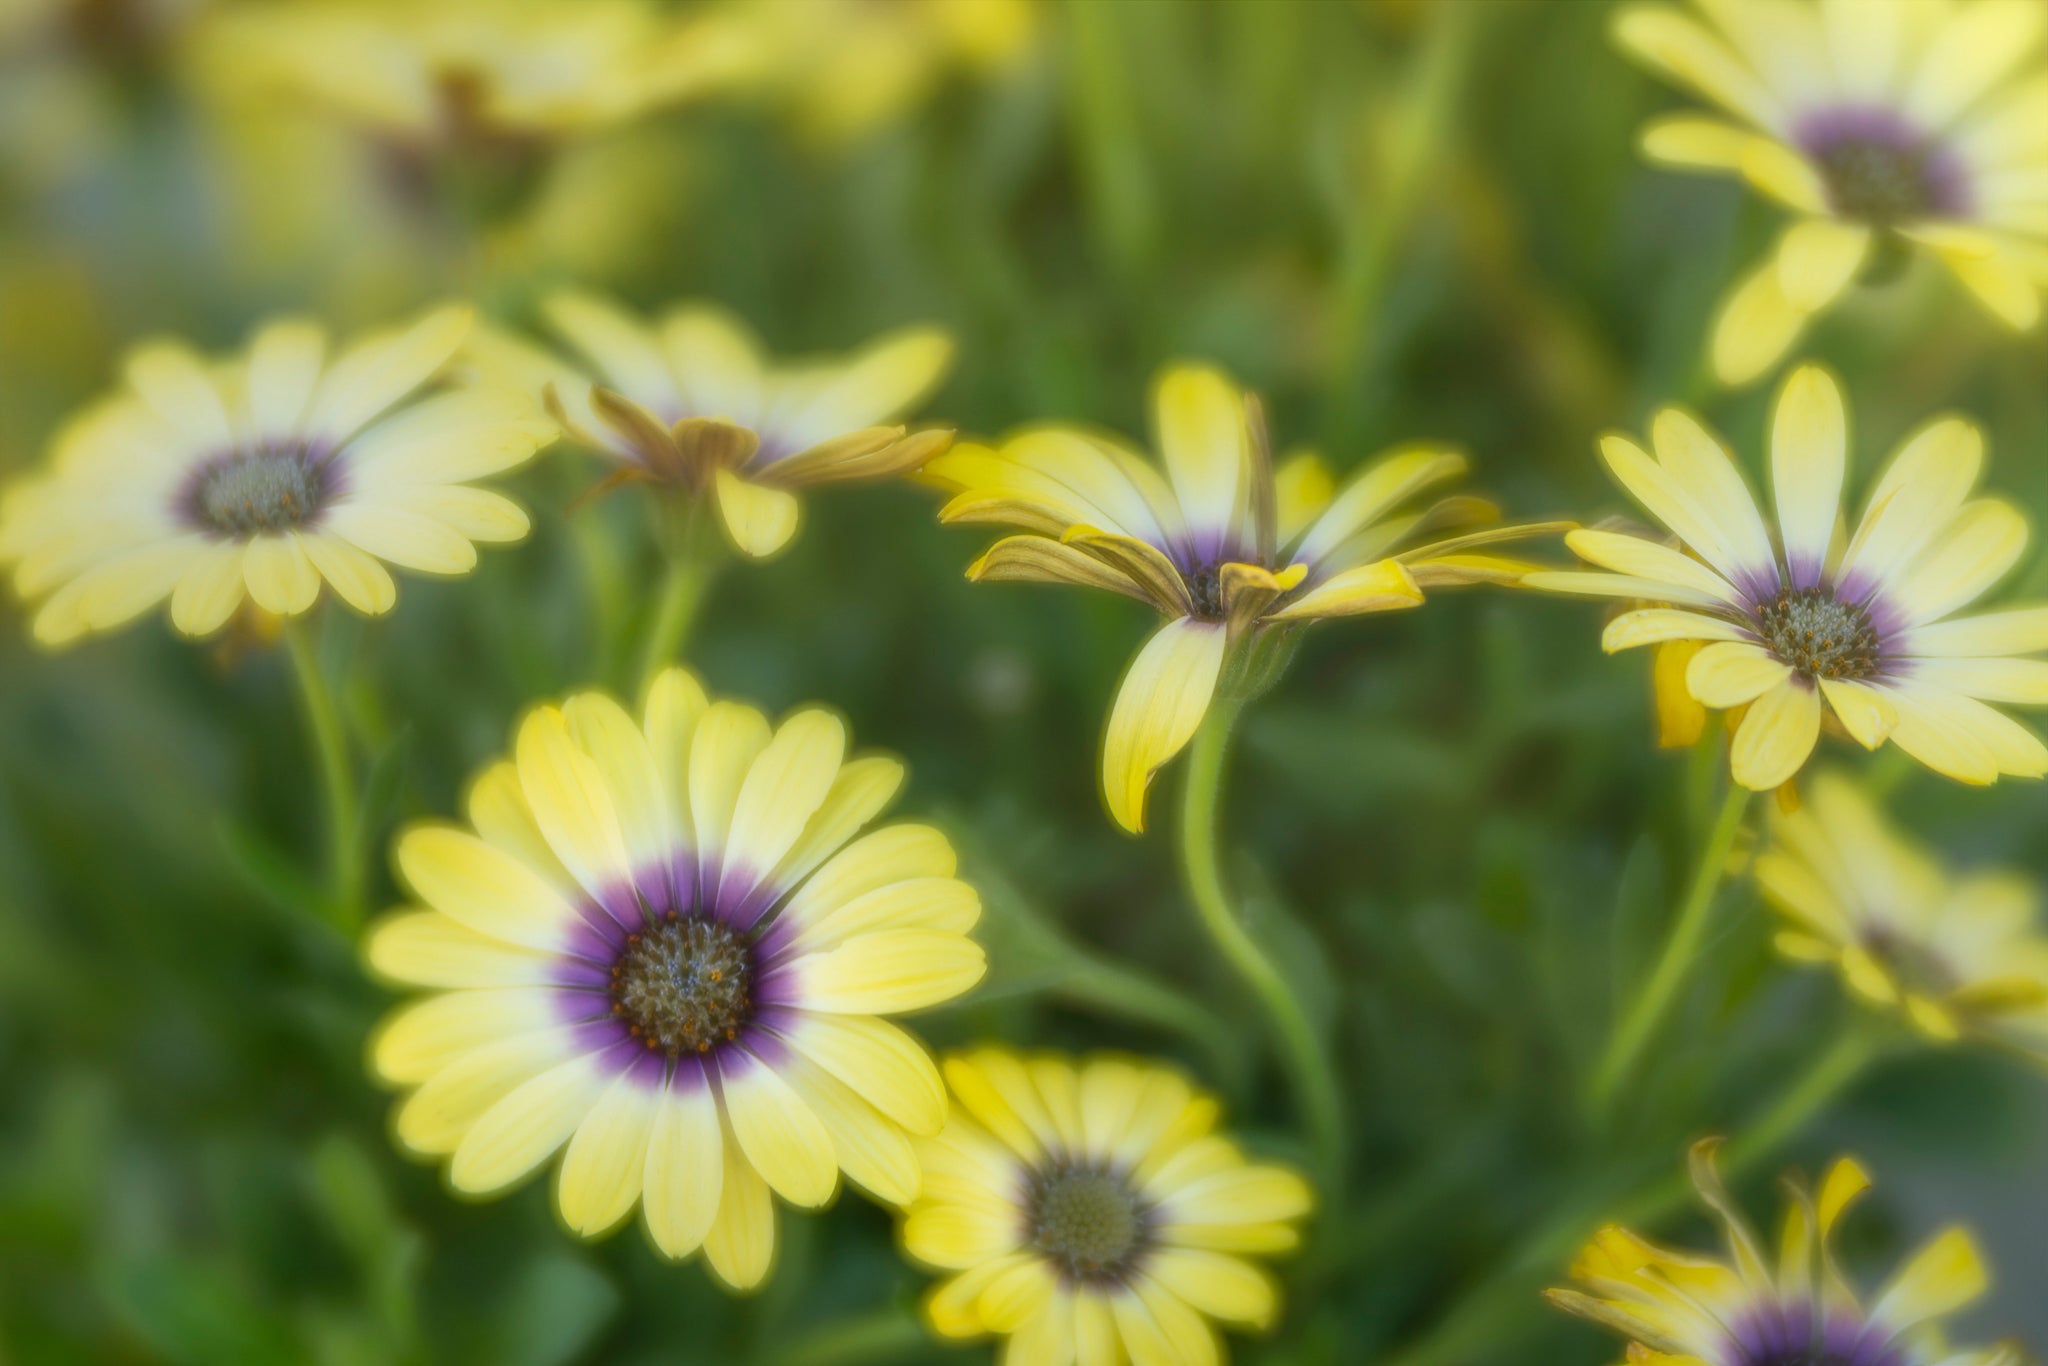 Fine art flower photograph by Cameron Dreaux of yellow daisies in the sunlight with a green background. 